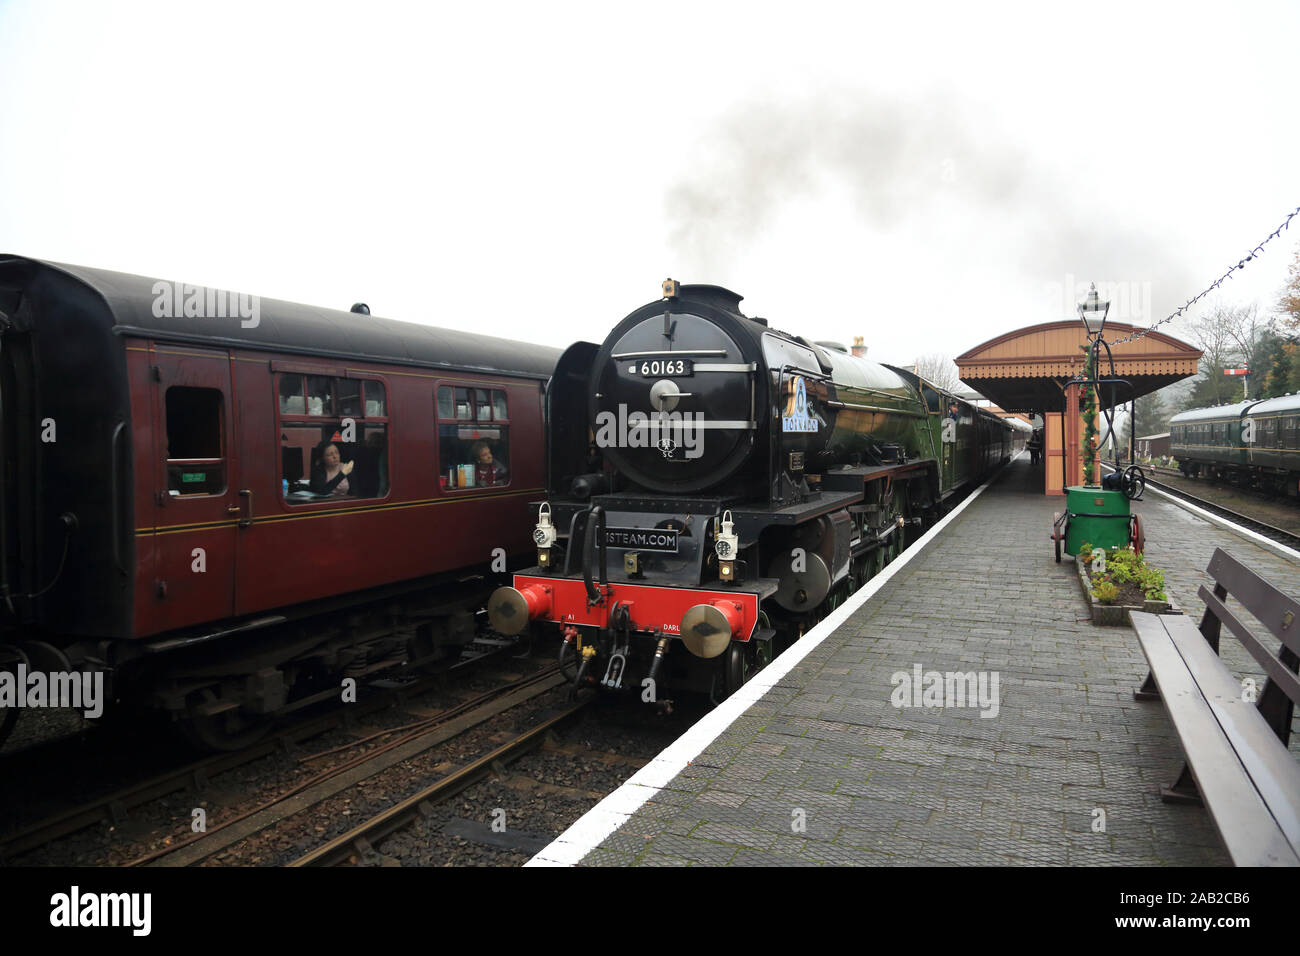 Peppercorn A1 Pacific No. 60163 Tornado steam locomotive arriving at Bewdley station on the Severn valley railway, England, UK. Stock Photo